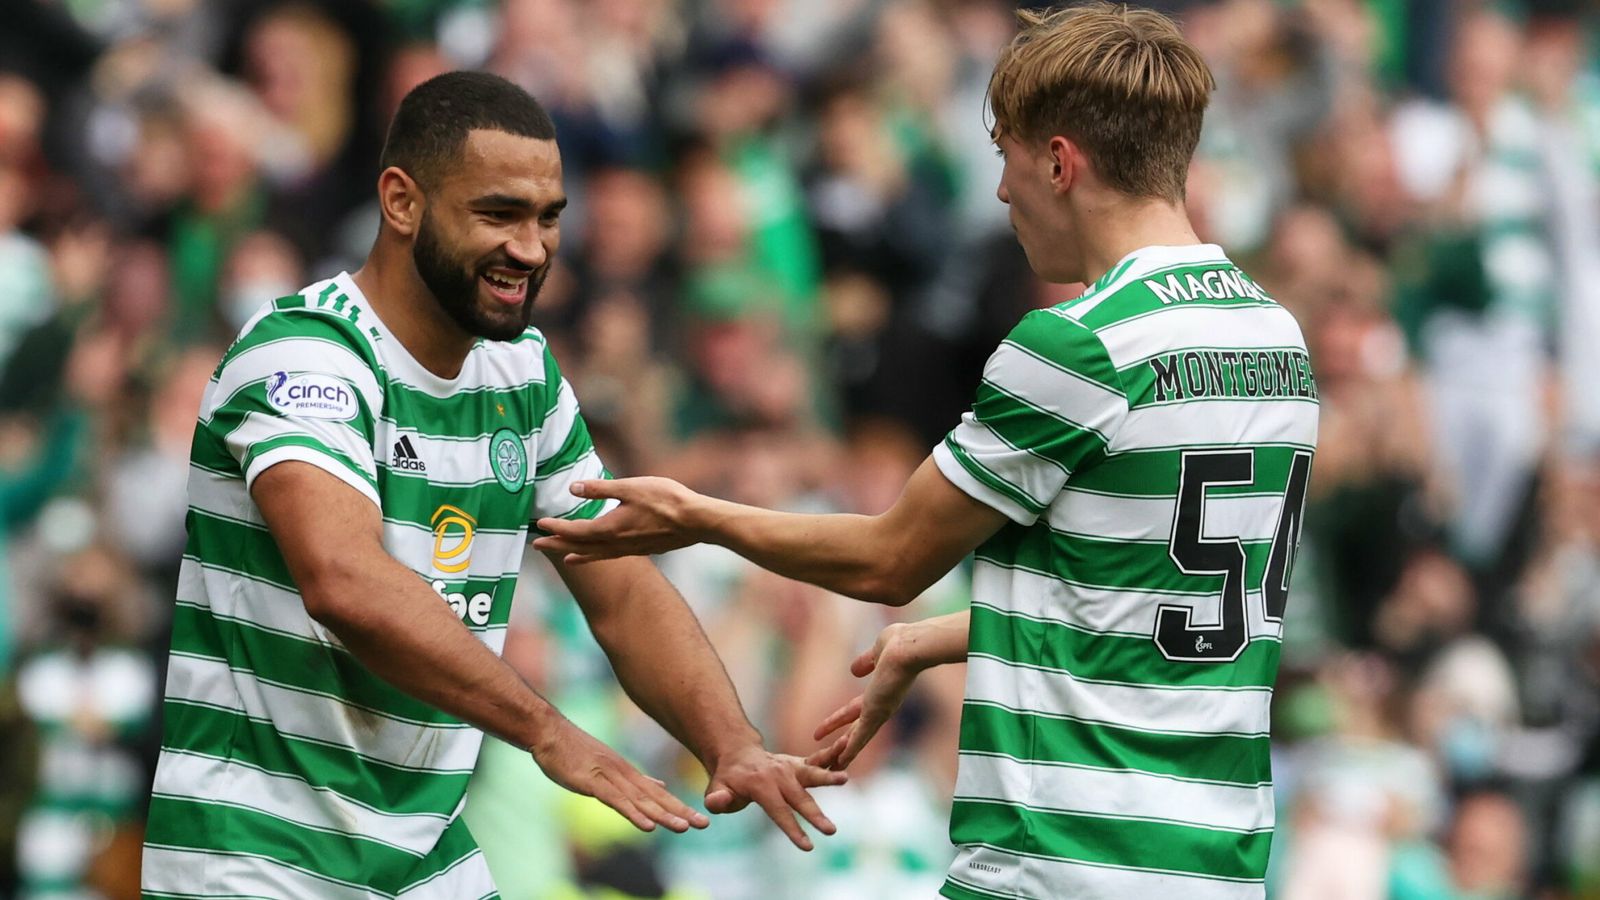 Scottish Premiership Team of the Week: Celtic, Rangers, Hearts, Hibernian, Motherwell, Dundee and more feature